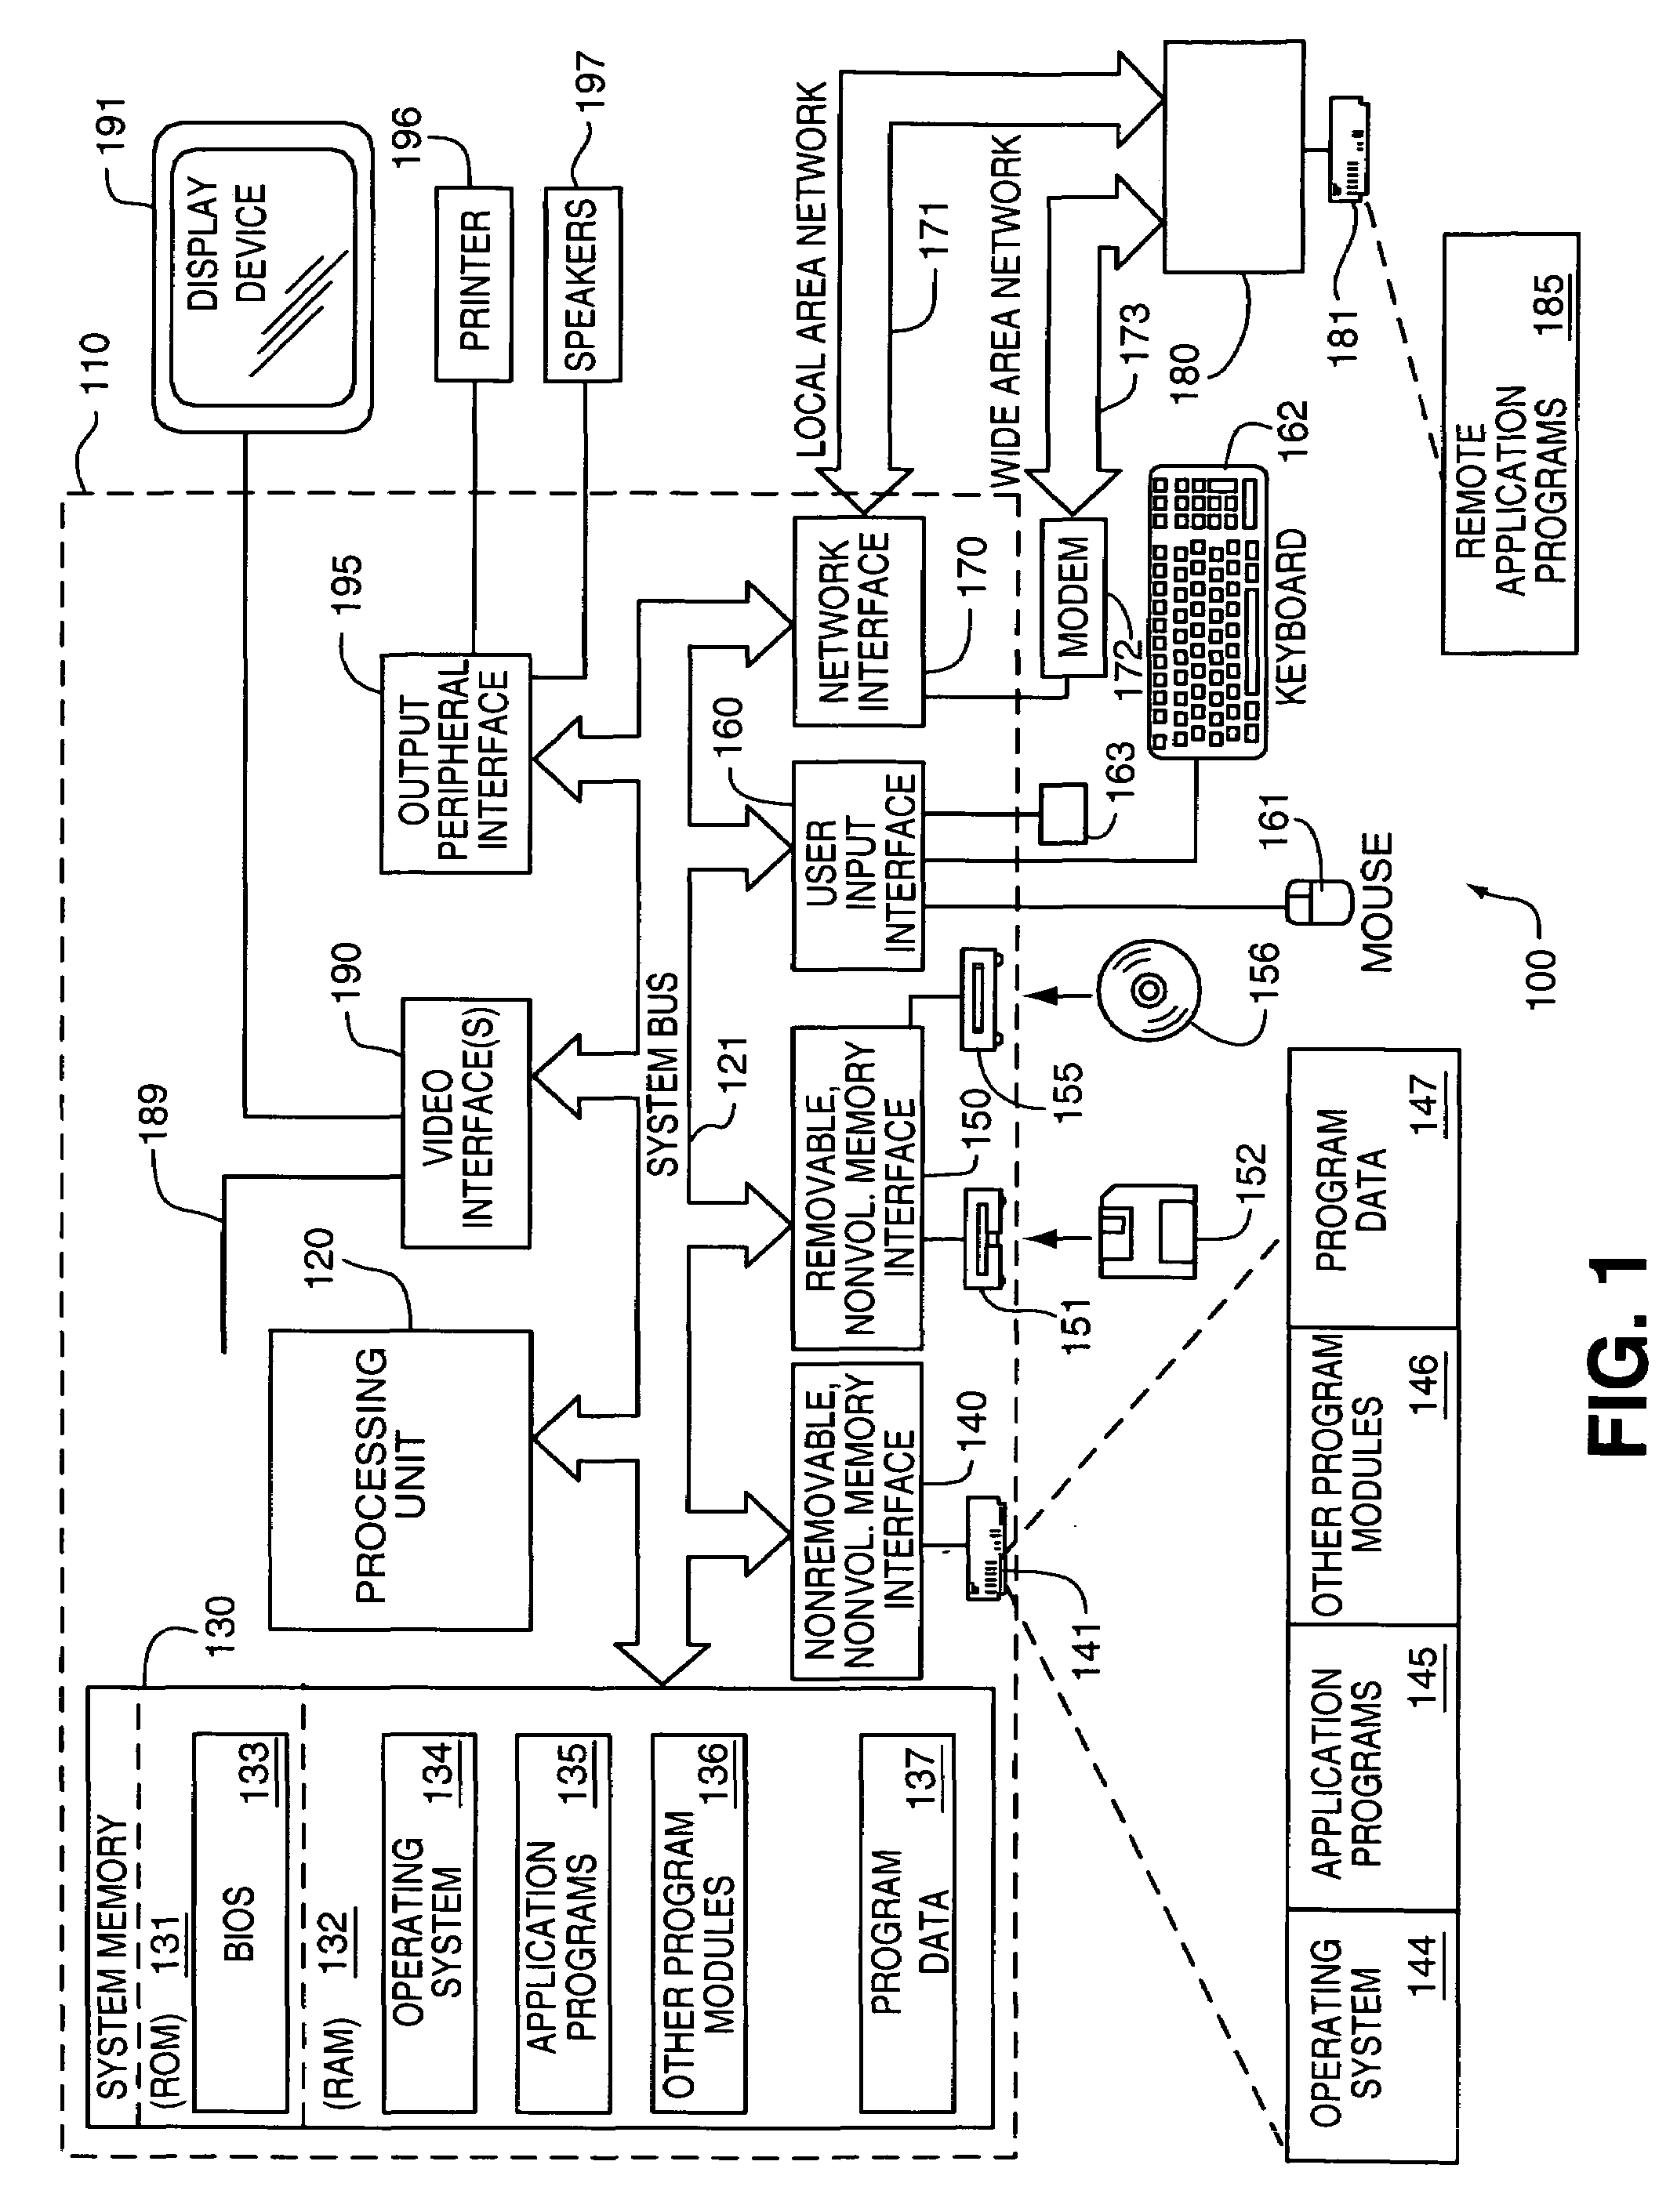 System and method for viewing and editing multi-value properties